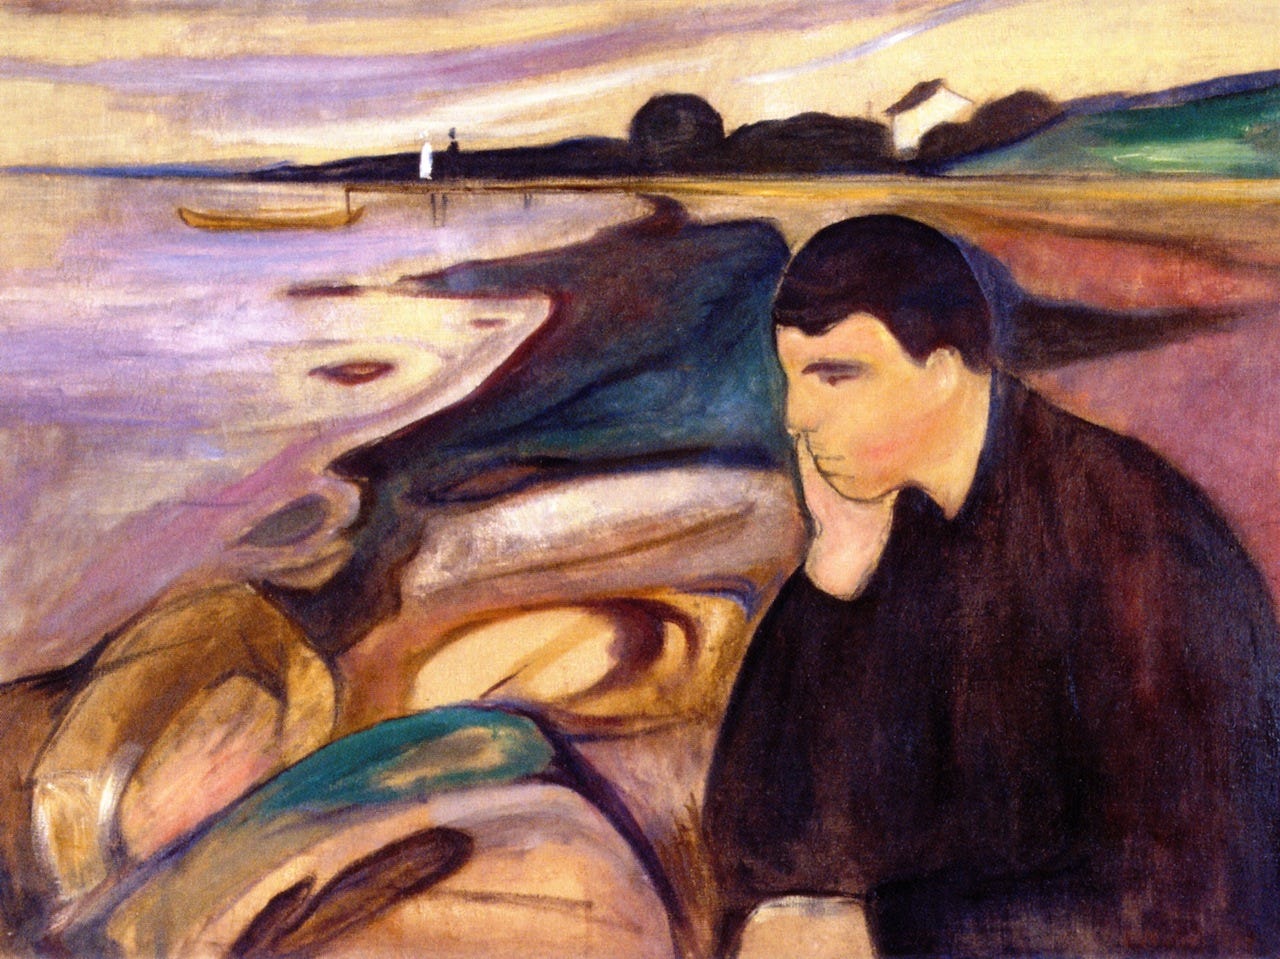 Edvard Munch's painting of melancholy man on the beach, head in hand.